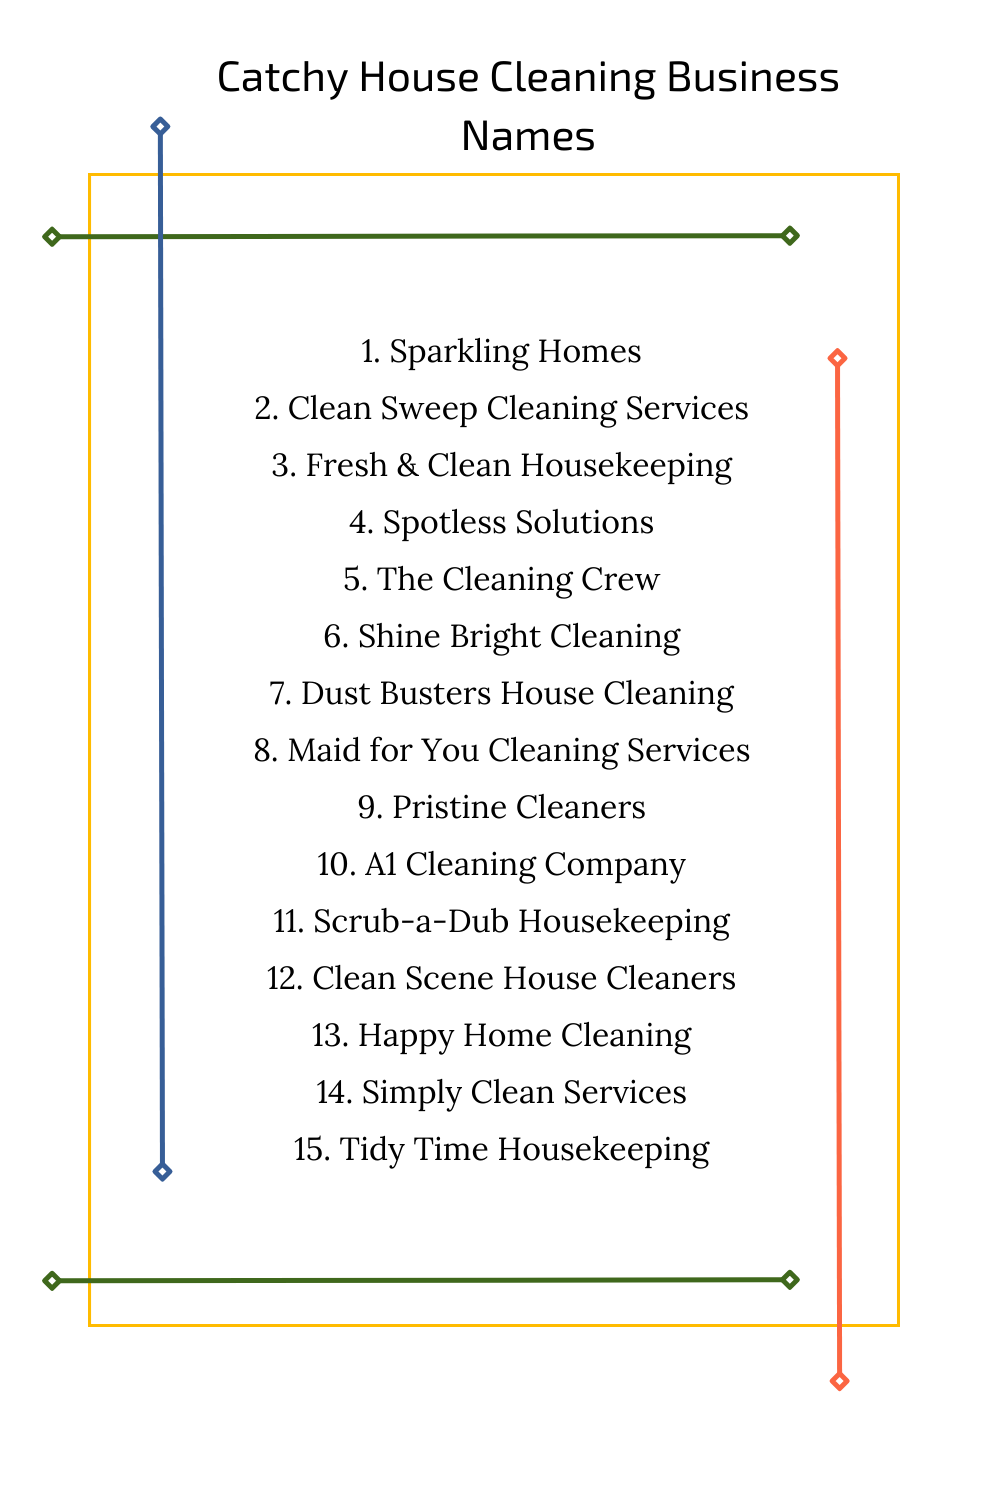 Catchy House Cleaning Business Names